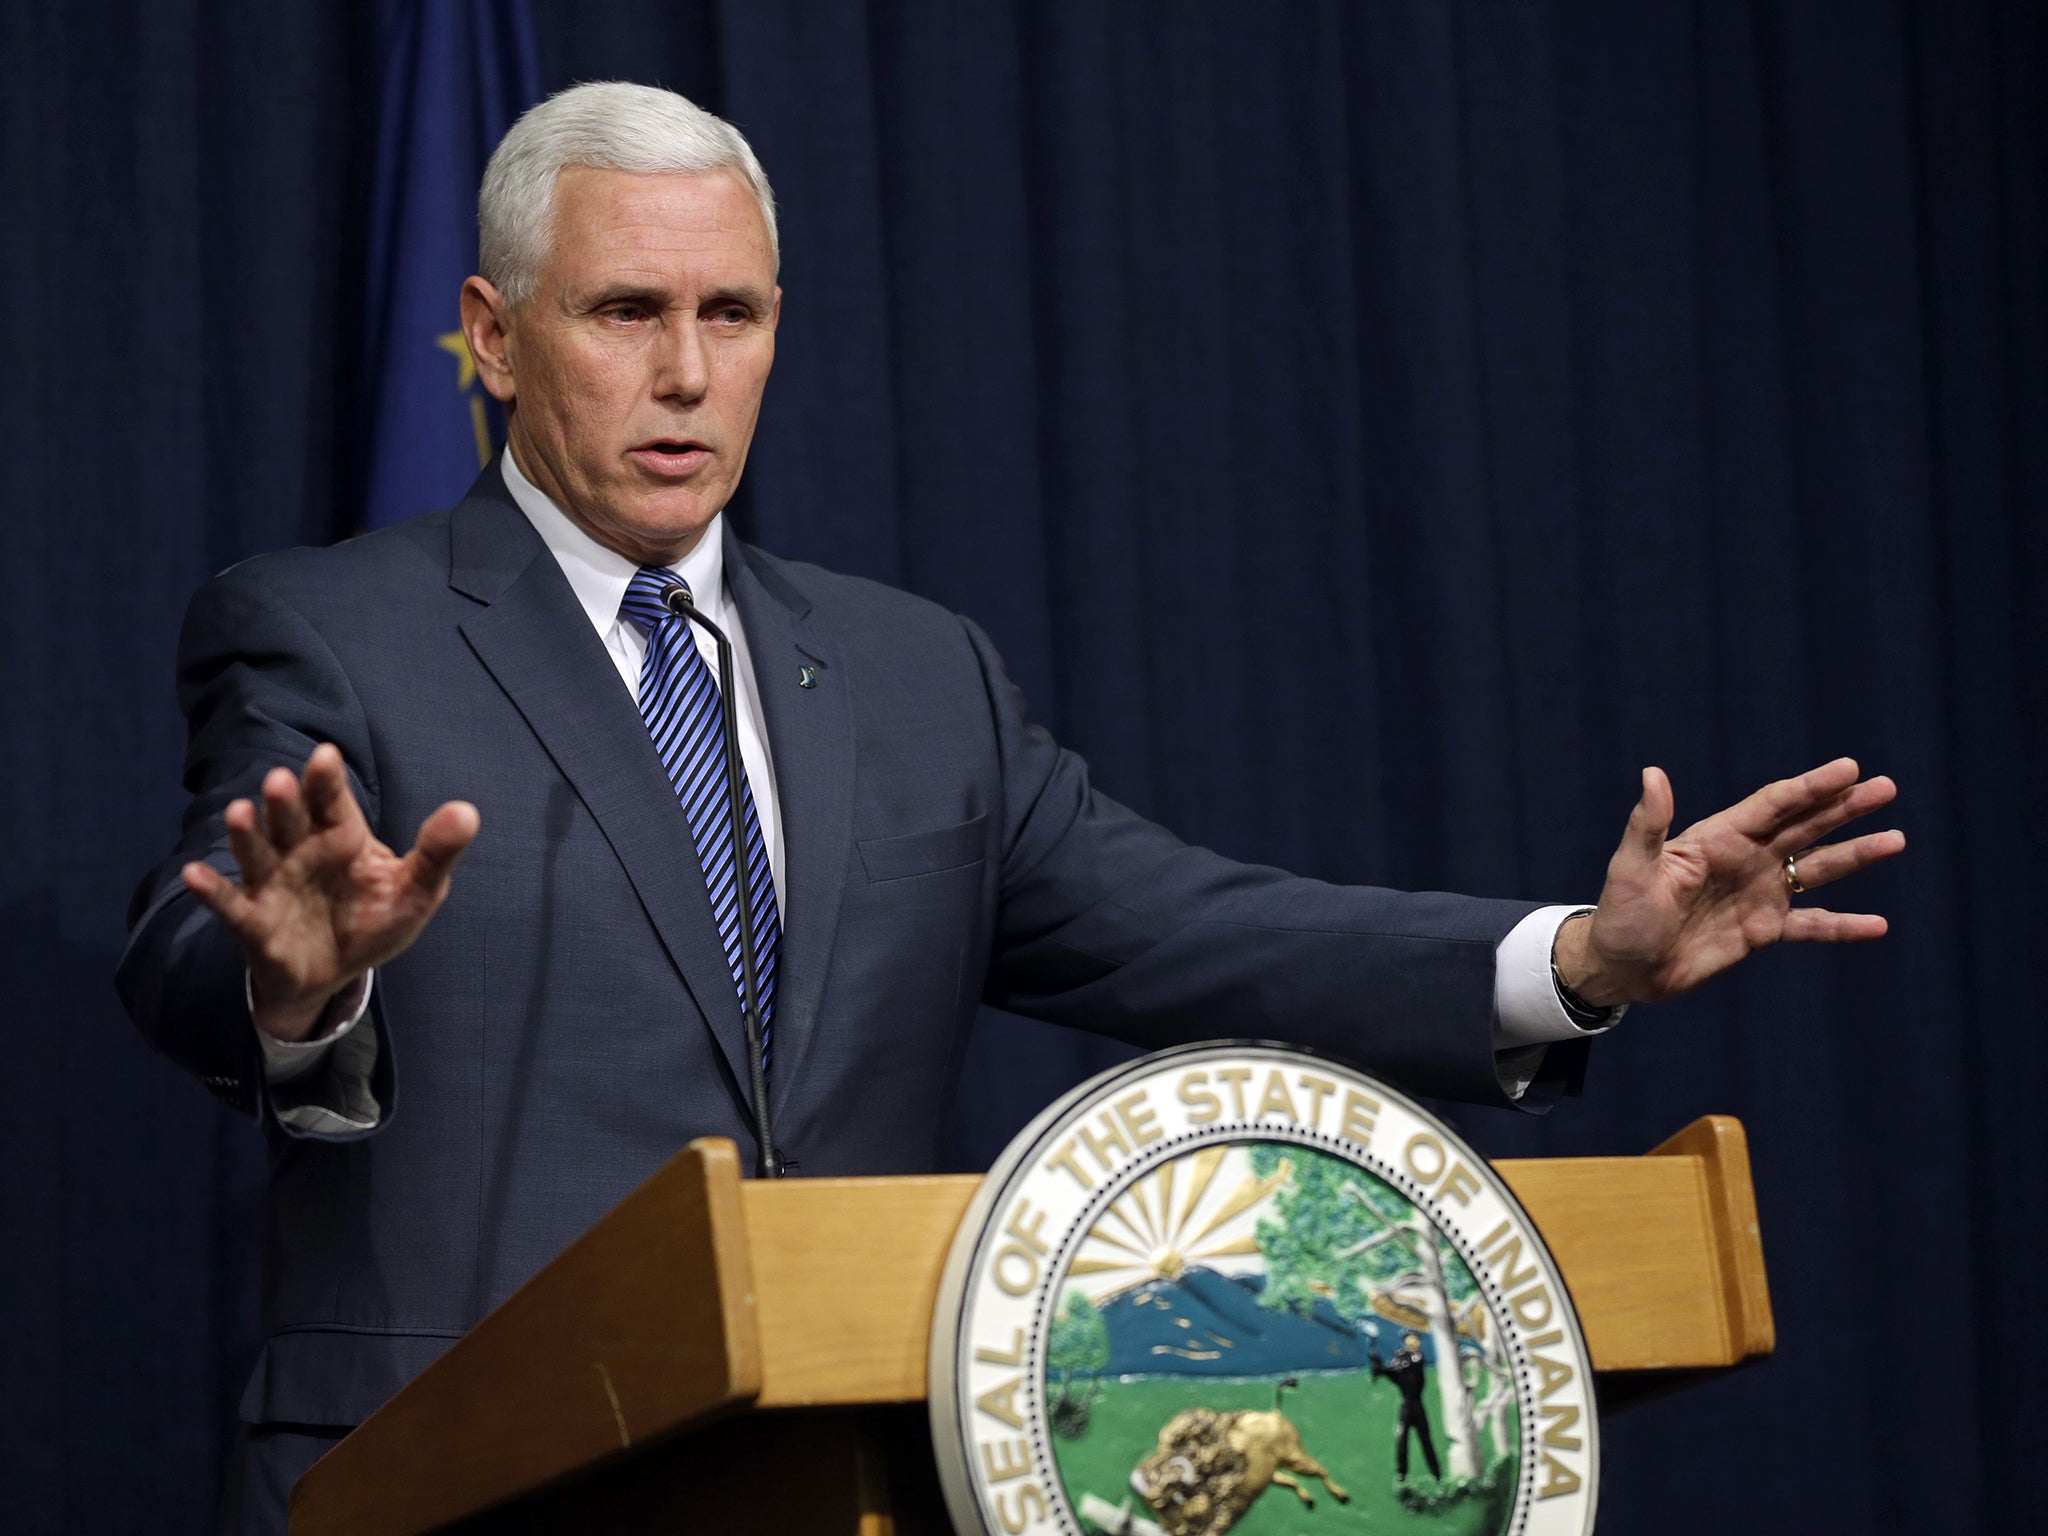 Mike Pence, who has previously opposed needle
exchanges, announced the programme yesterday